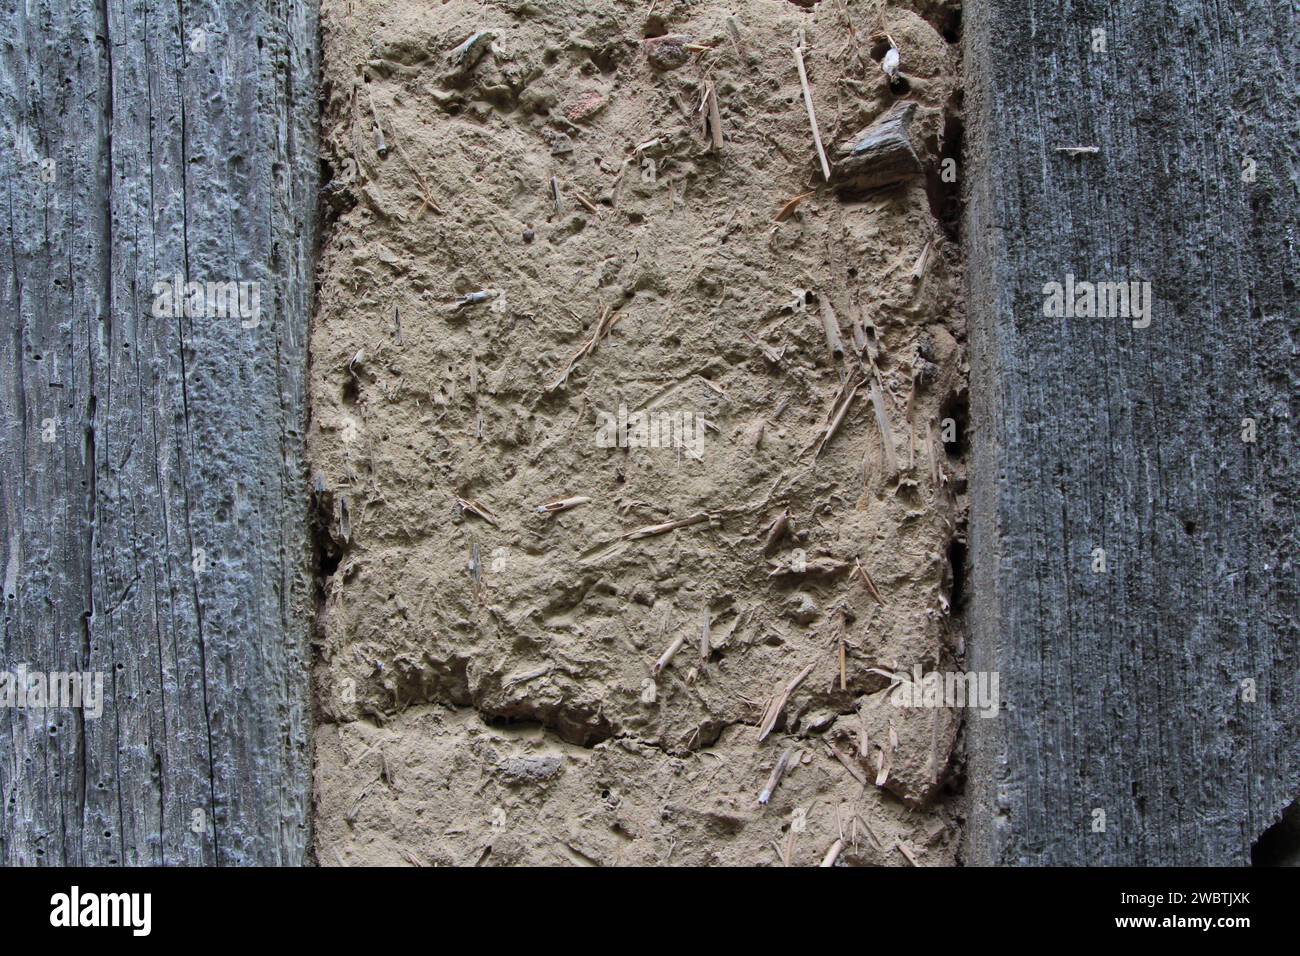 Detail of wattle and daub filling in a half-timbered house in Mesnil-Saint-Père in the Champagne-Ardennes region of France. Stock Photo